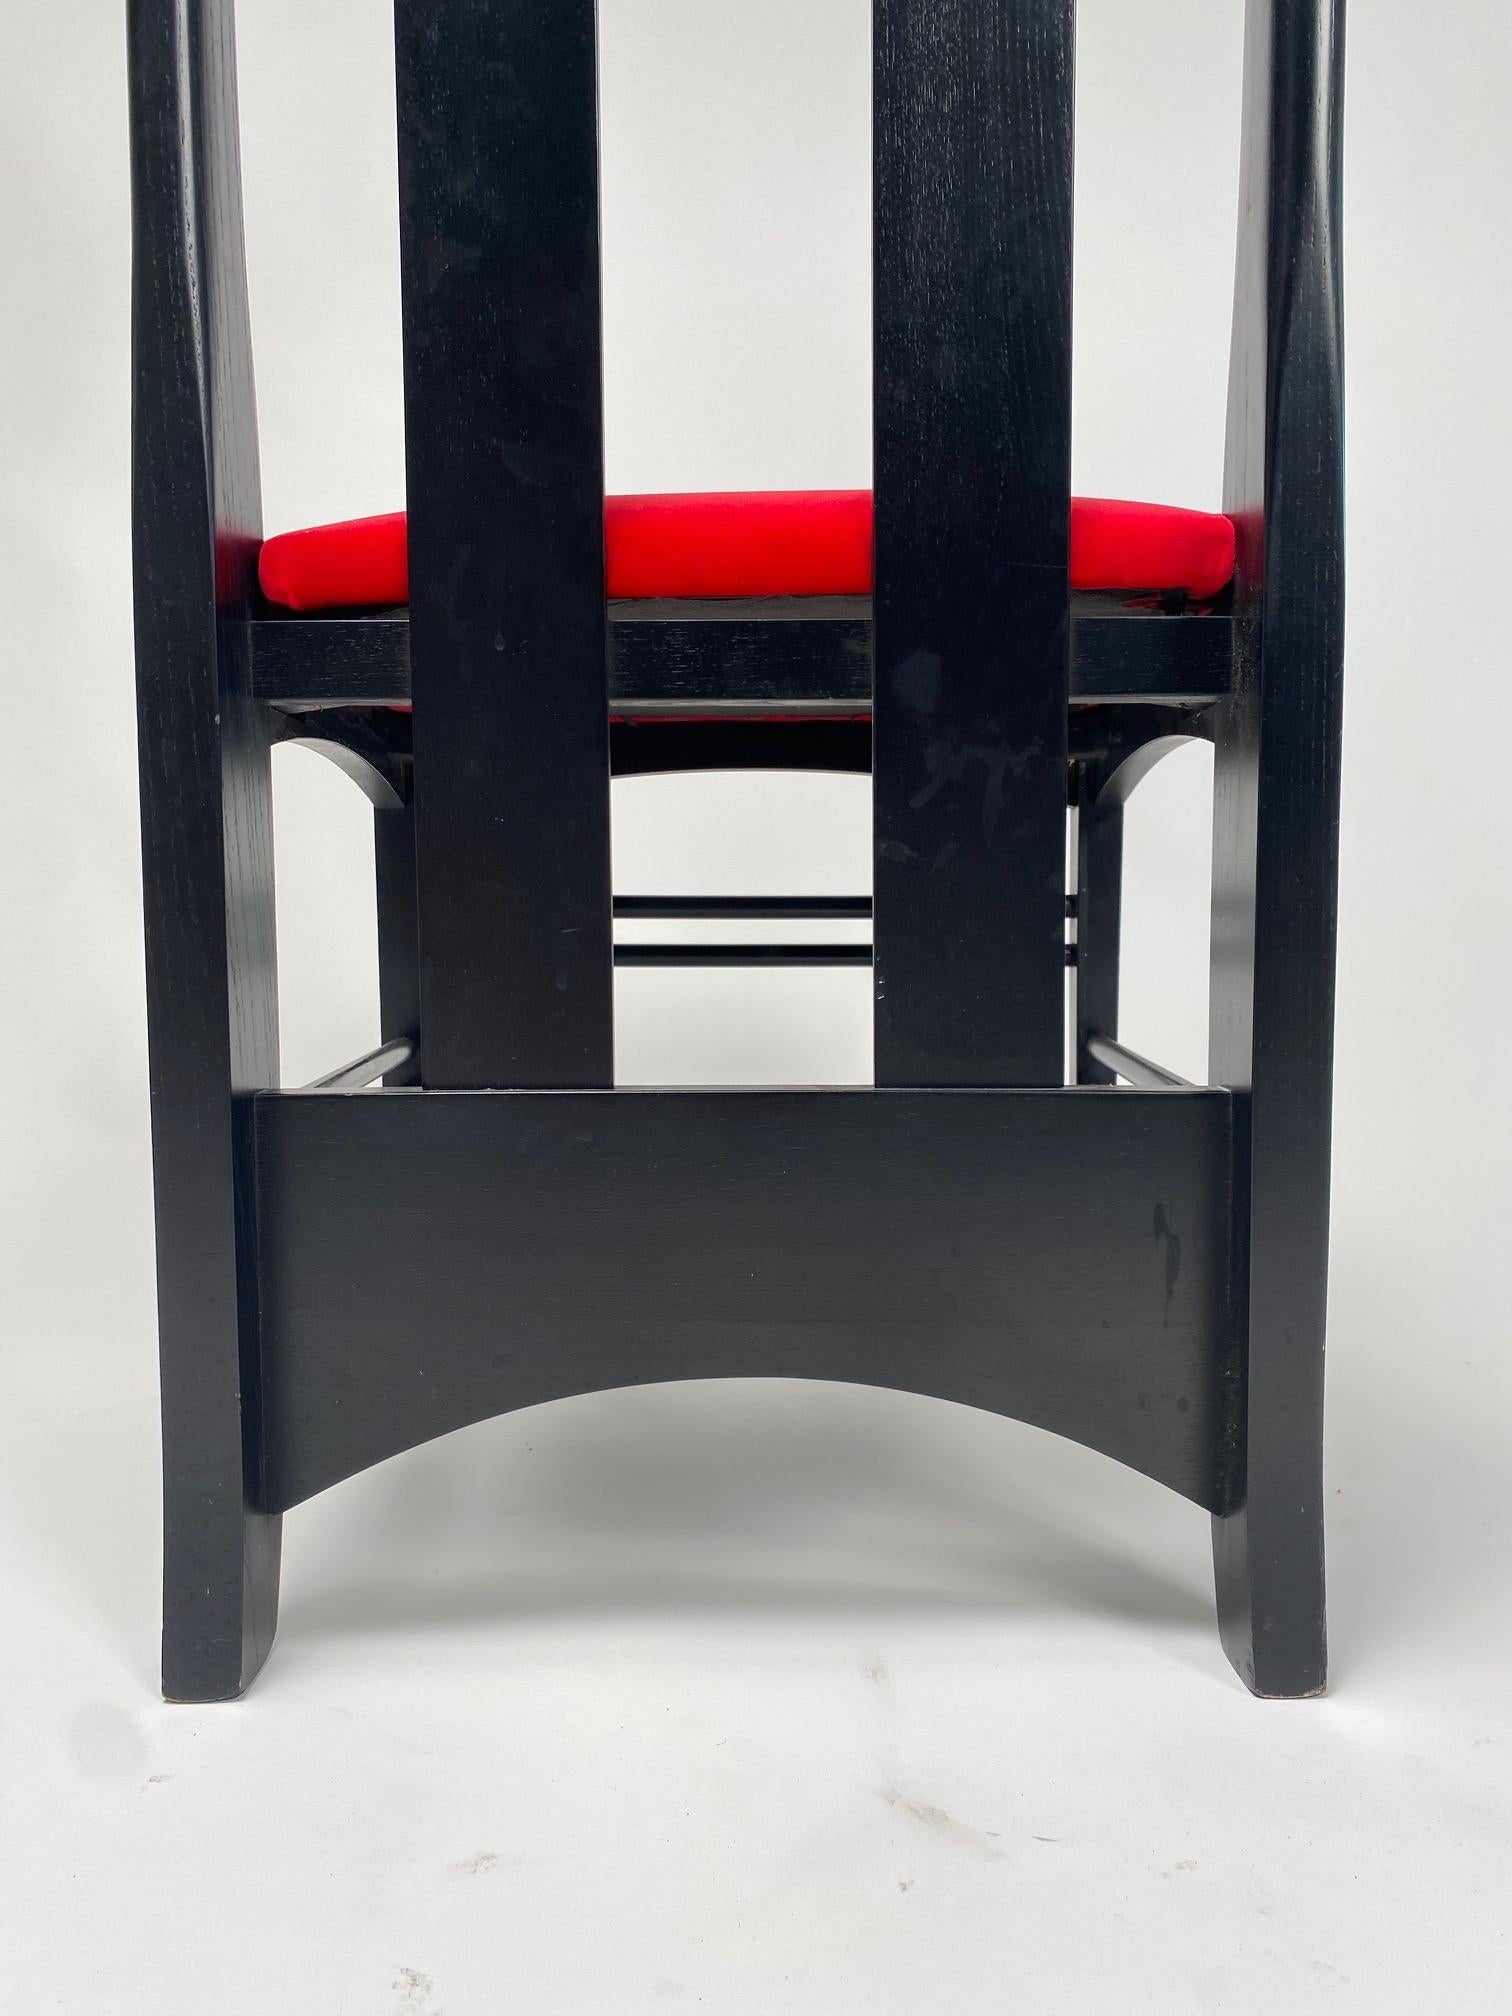 Ebonized Set of 2 Argyle Chairs by Charles R Mackintosh for Atelier International For Sale